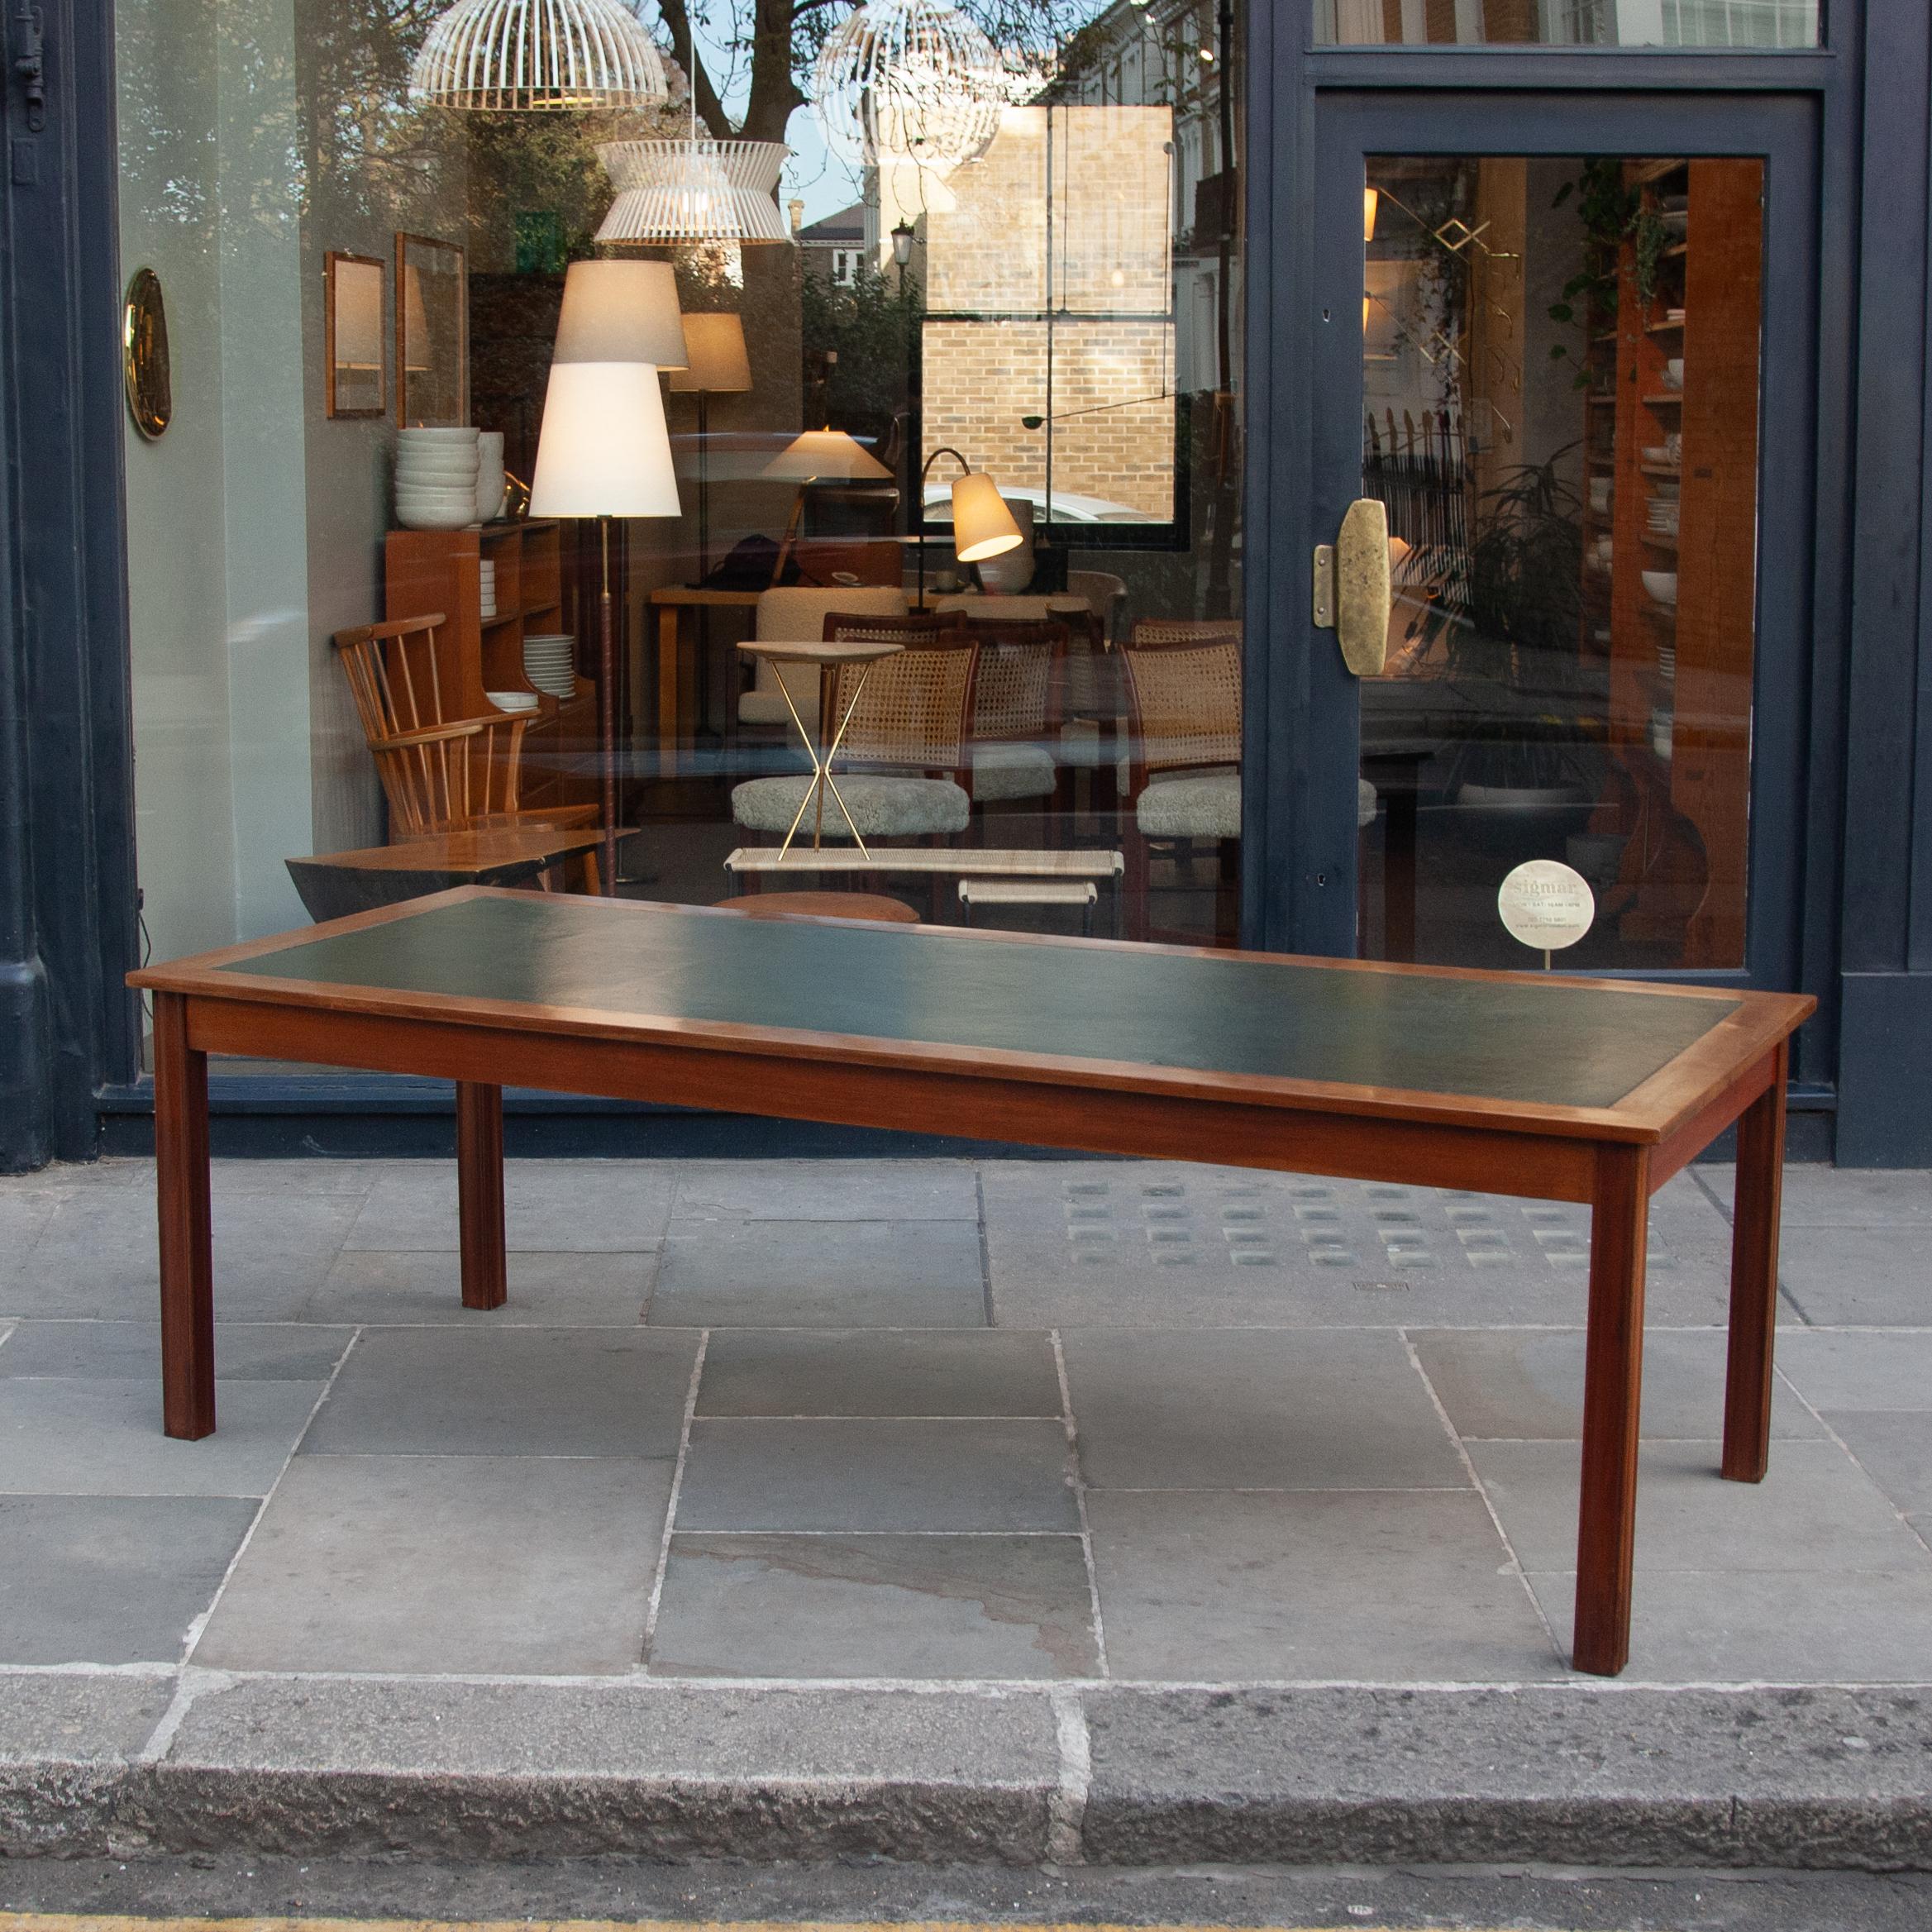 A 1940s Danish mahogany library table with leather insert would be most appropriate used today as a large desk or dining table. This substantial neoclassical table is an example of Danish cabinetmakers adopting the British aesthetic vernacular. The